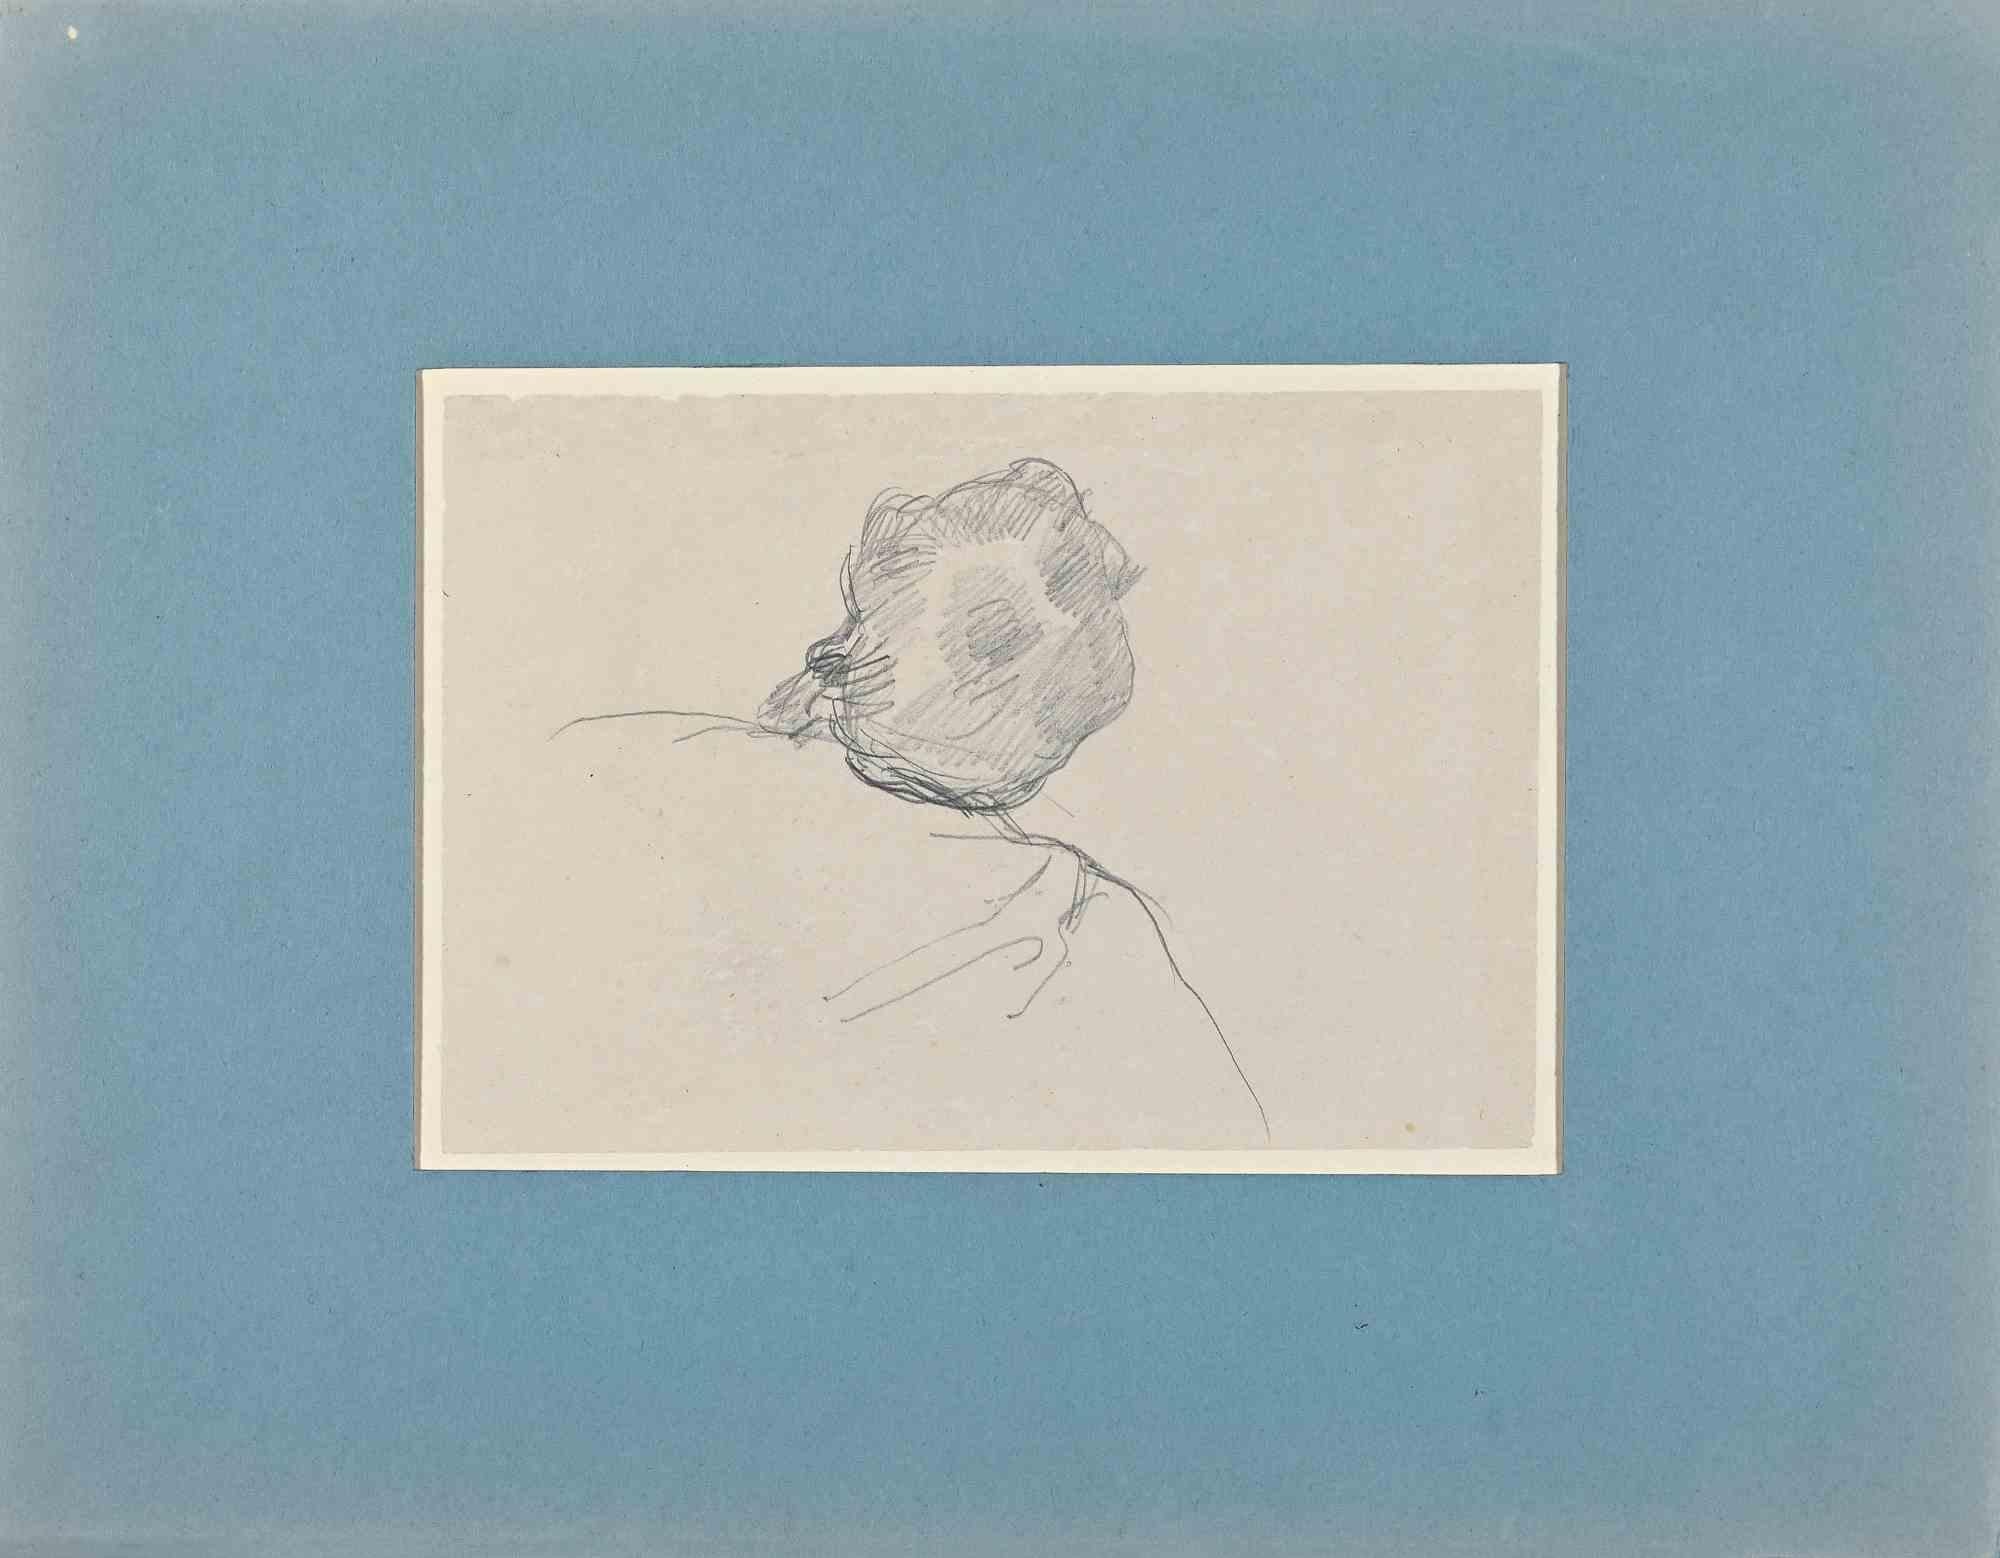 Portrait of Man from - Drawing on Paper by E. Giraud - Late 19th Century - Art by Eugène Giraud